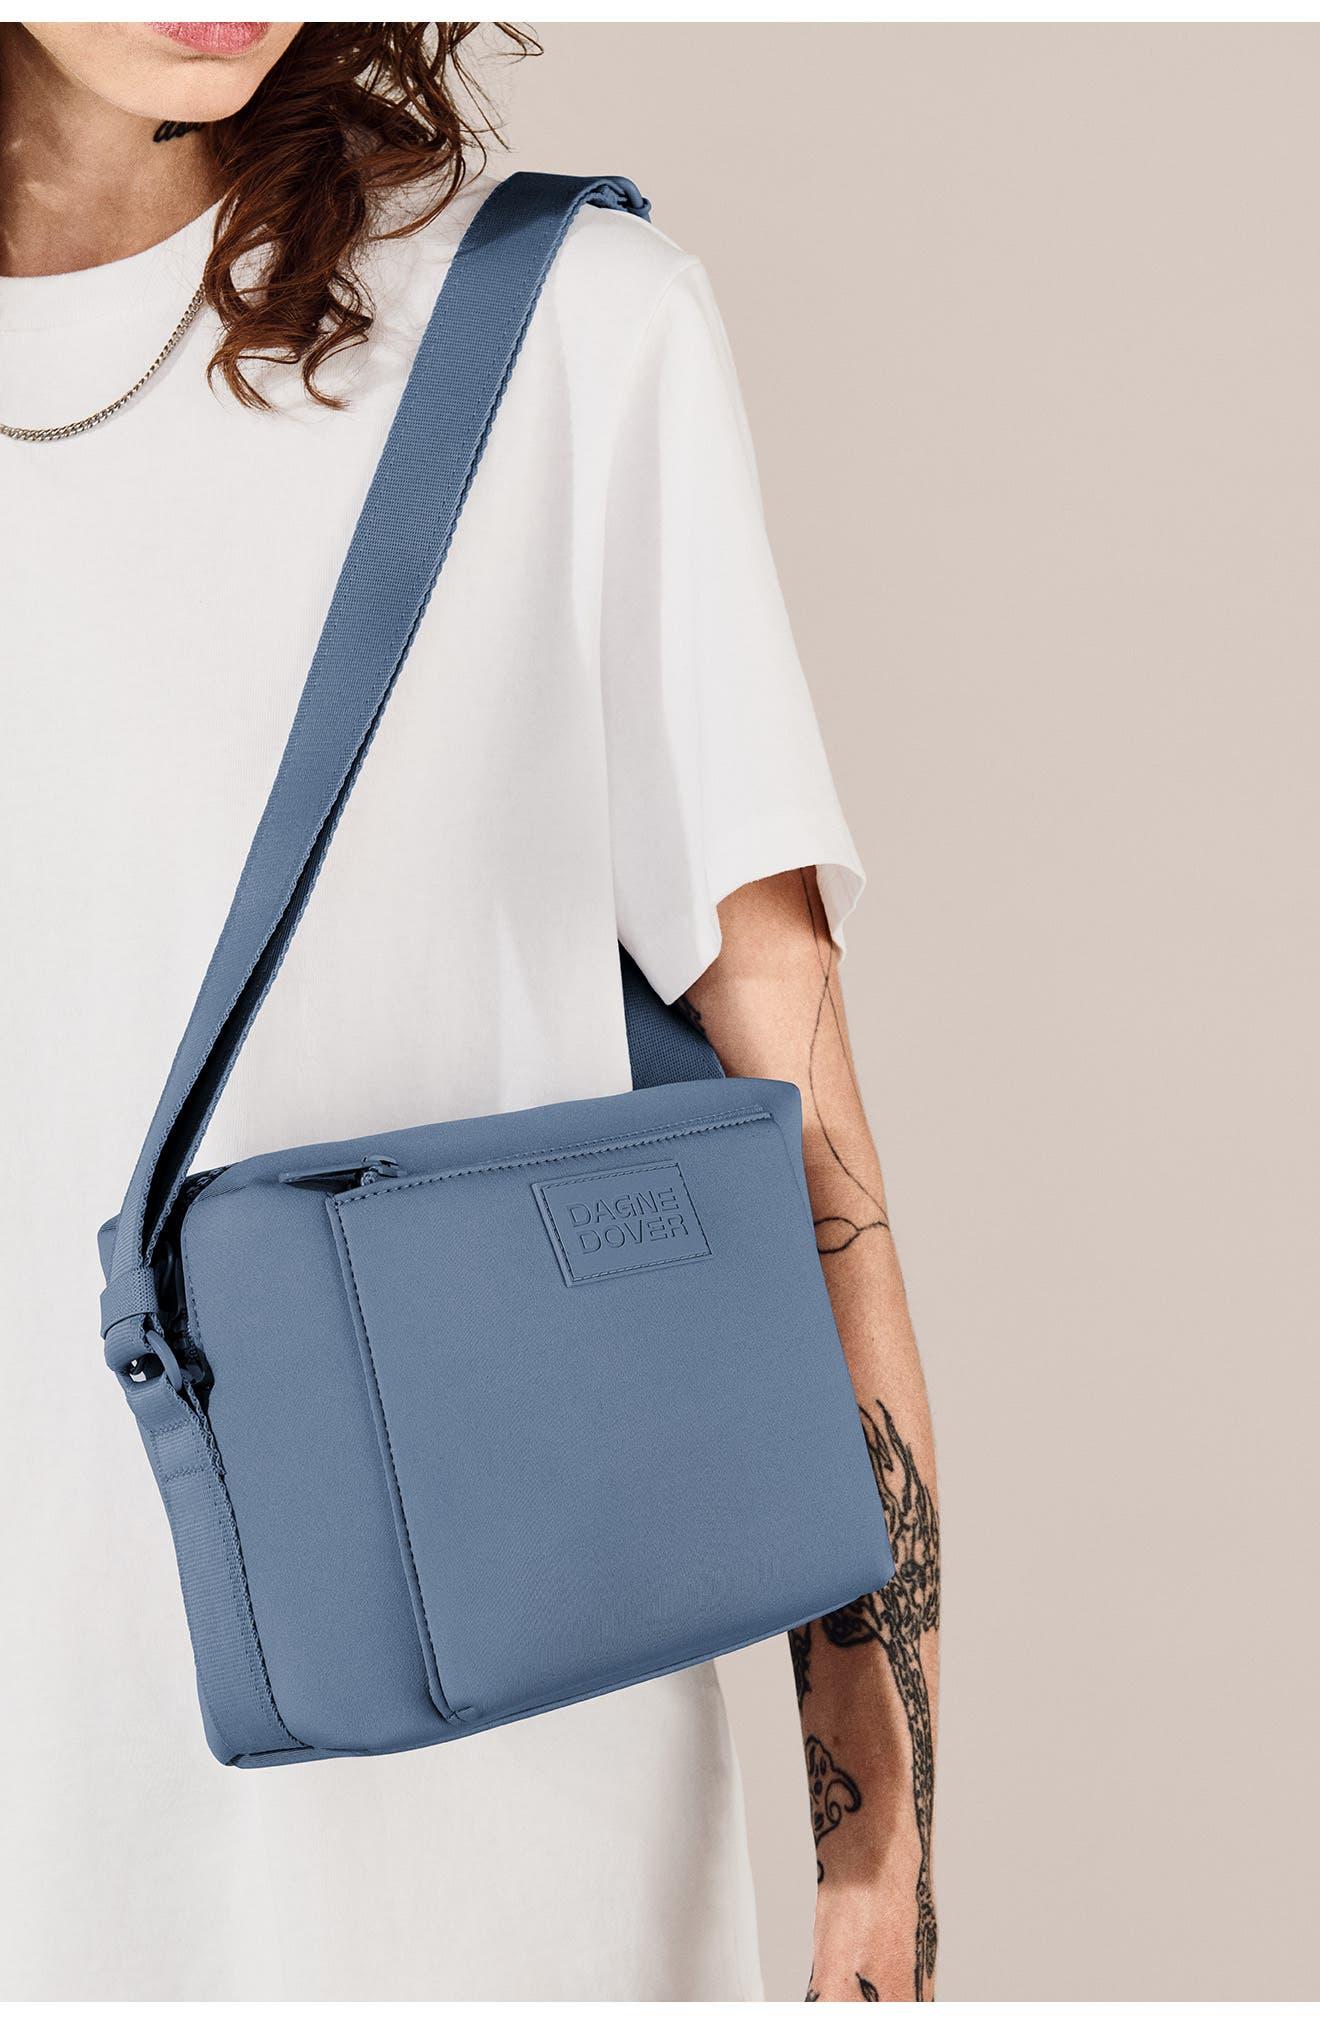 Dagne Dover - The Micah Crossbody fits all your essentials and more, from  your wallet to your headphones to your sunnies.